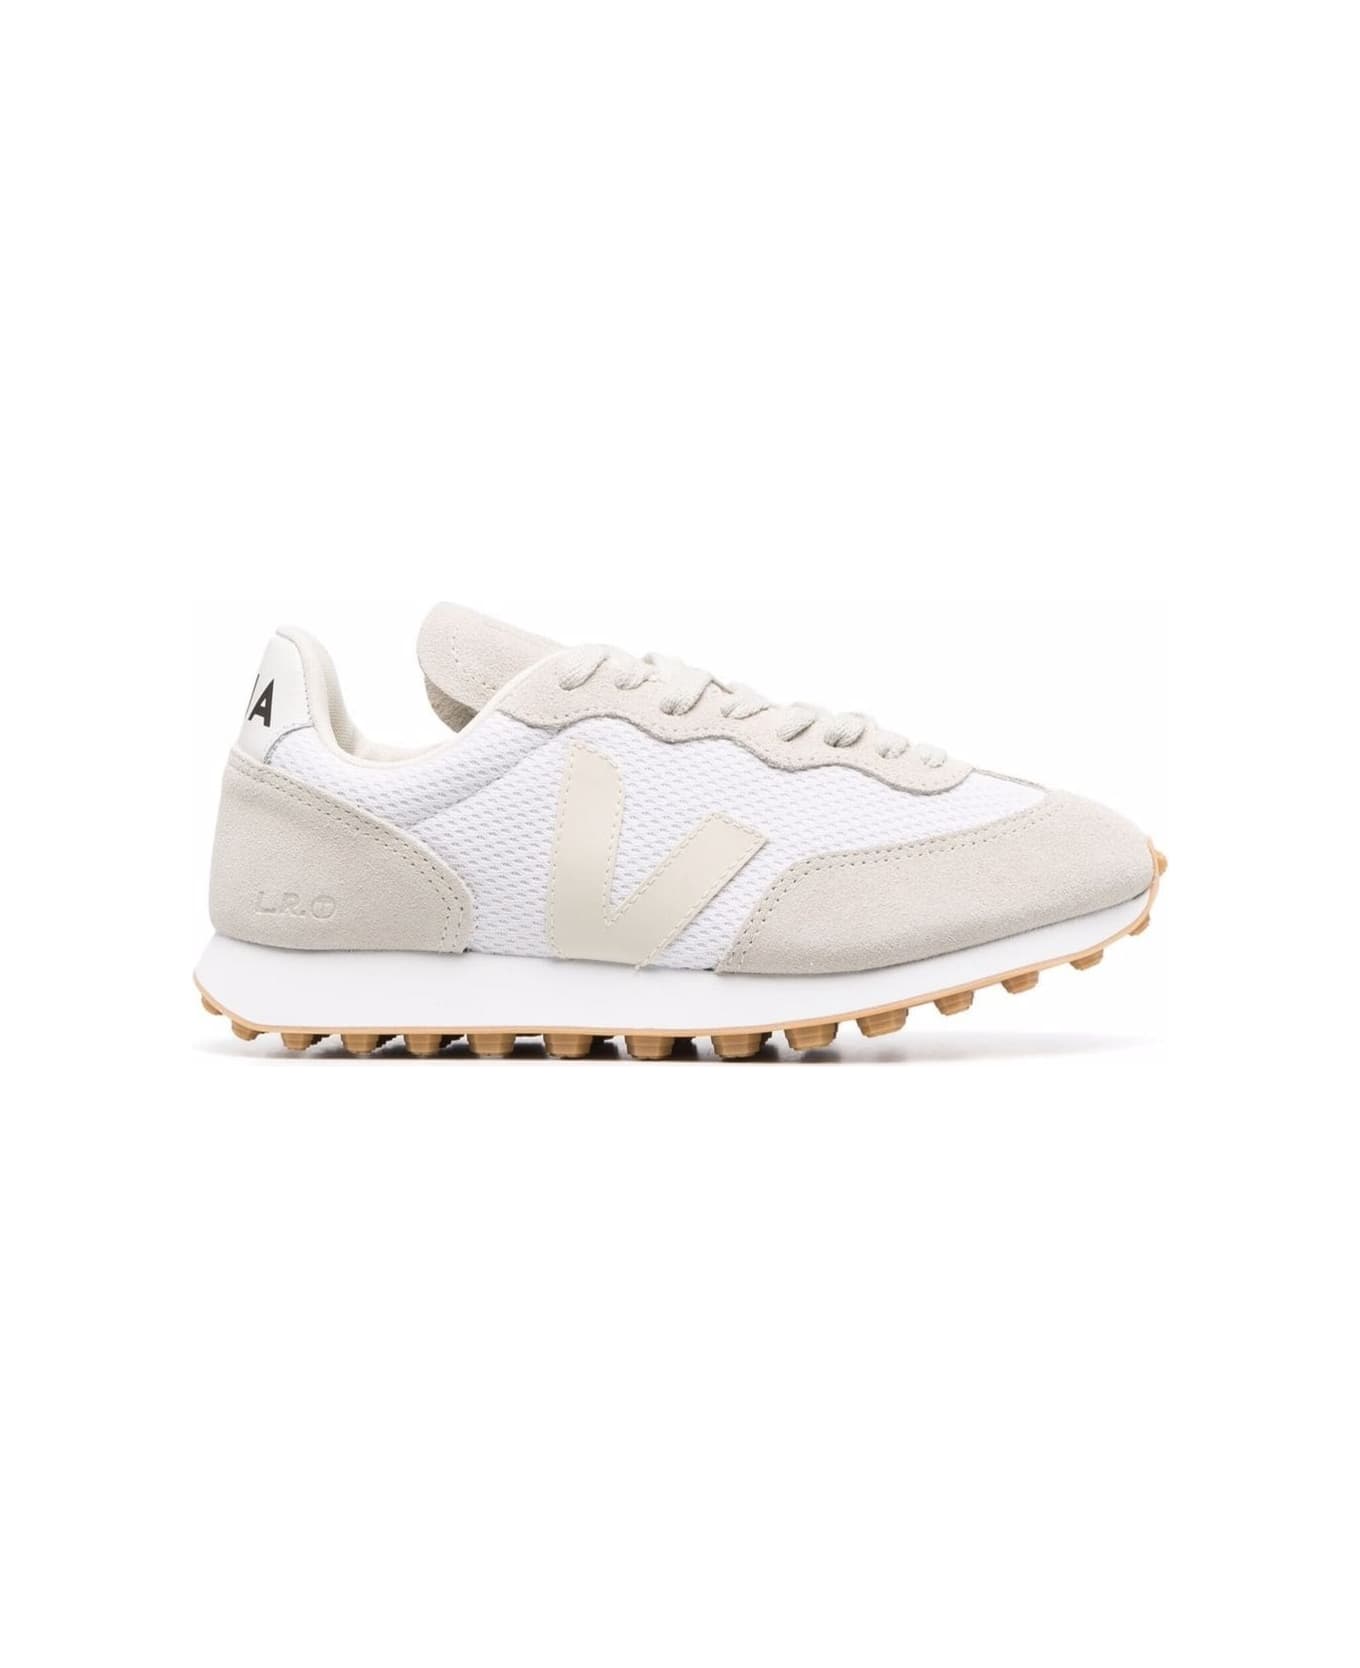 Veja Alveo Recycled Fabric And Suede Sneakers - White Natural